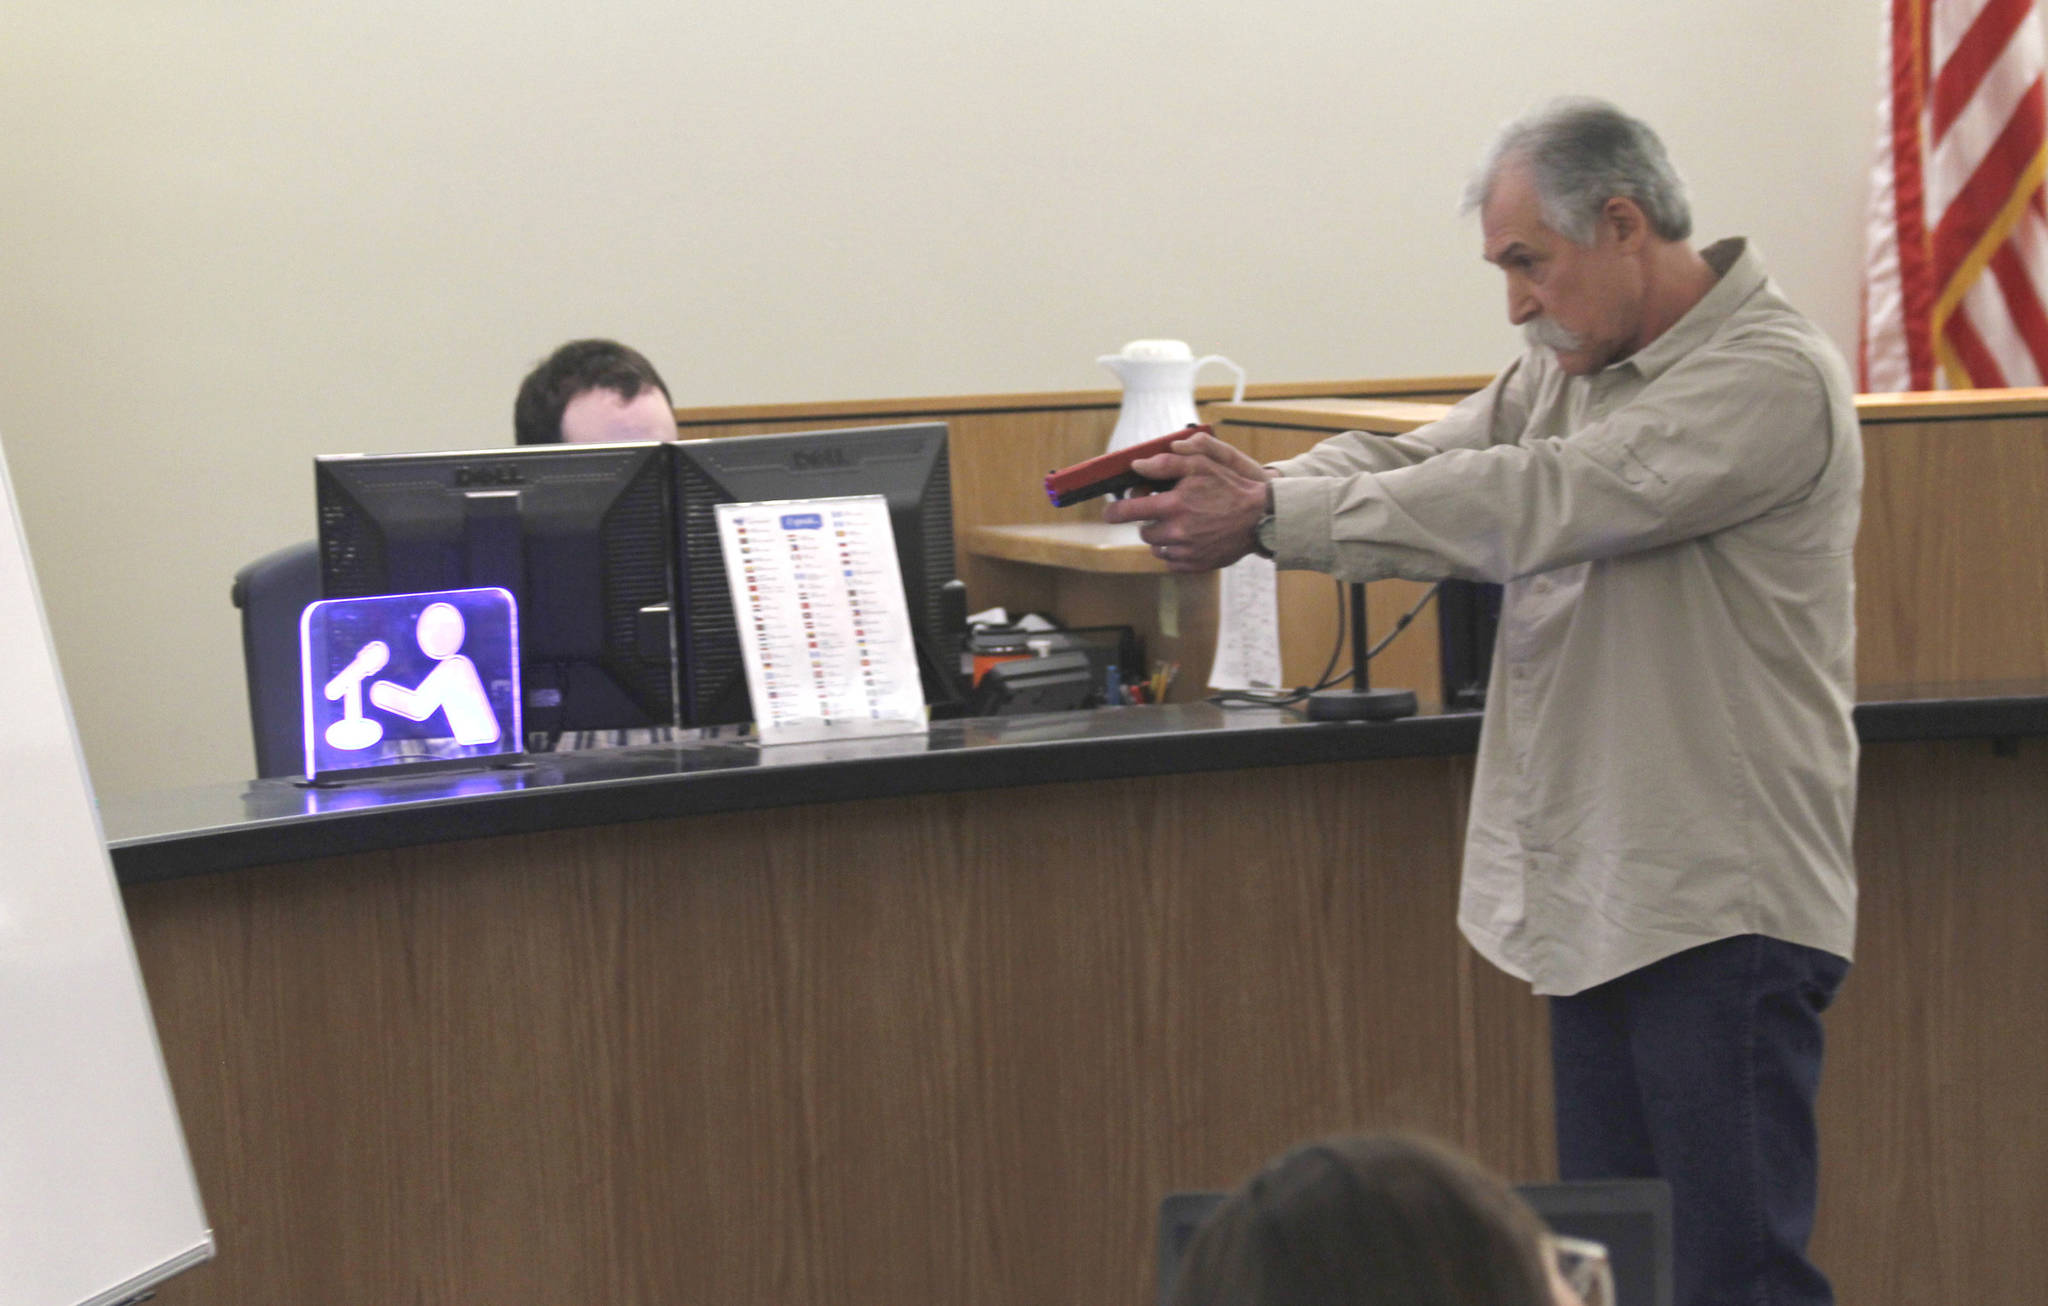 Chad Kendrick, firearm instructor and owner of Taku Tactical in Juneau, performs a firearm demonstration for members of the jury in the murder trial of Mark De Simone on May 8, 2018. De Simone is accused of killing Duilio Antonio “Tony” Rosales during a hunting trip in Excursion Inlet in 2016. (Alex McCarthy | Juneau Empire)